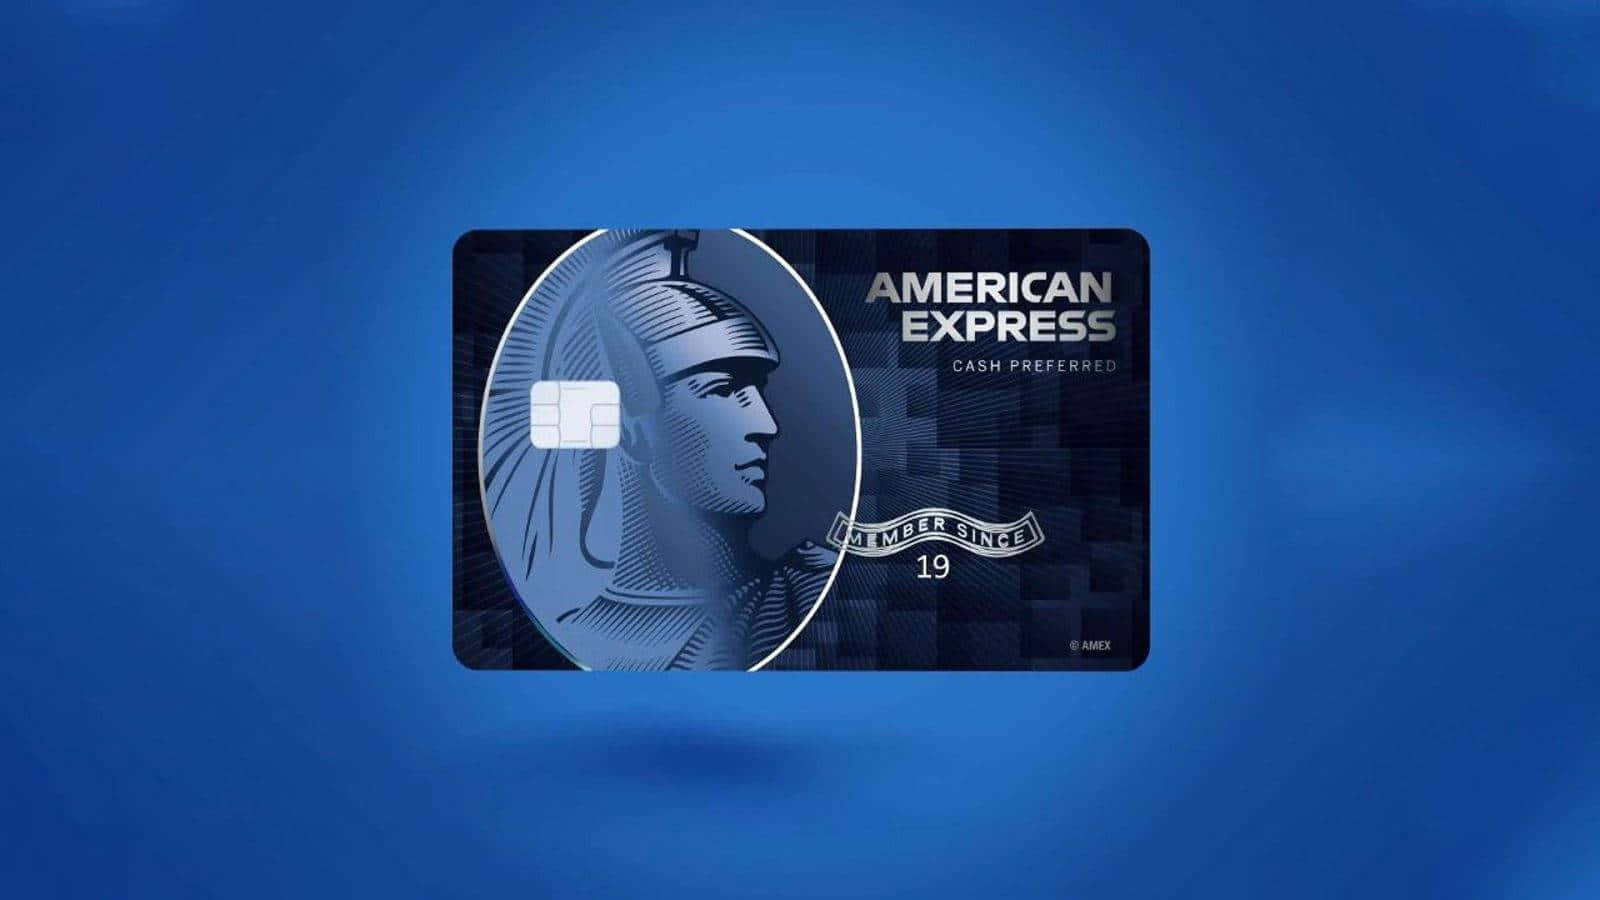 Get the most out of your financial experience with American Express